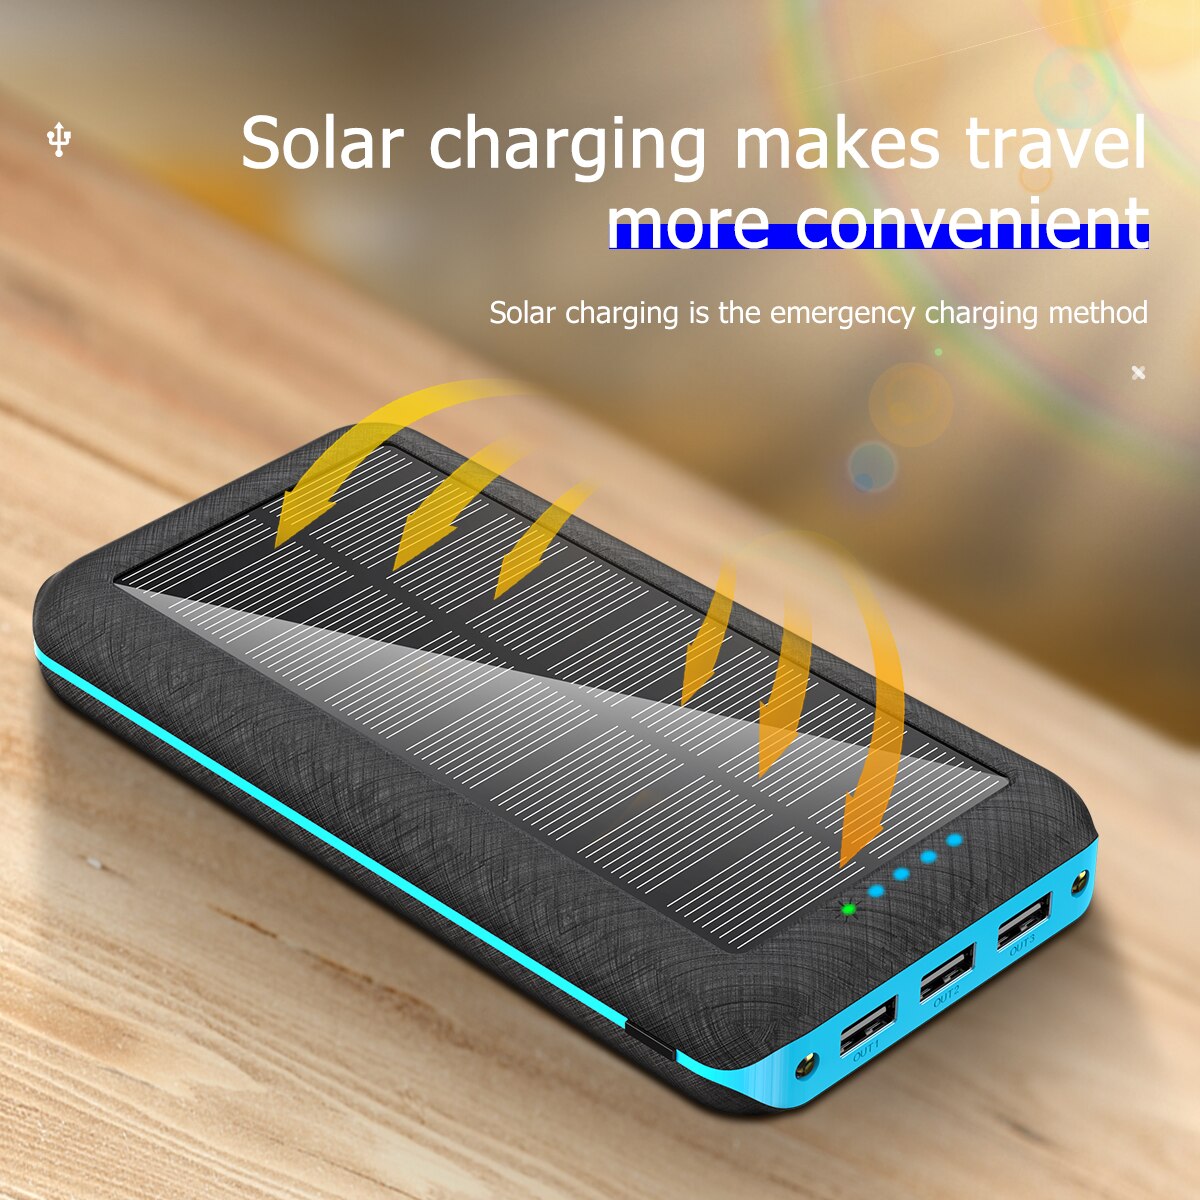 80000mAh Qi Wireless Solar Power Bank for Xiaomi Samsung Iphone Portable Charger 3USB Phone Charger Outdoor Travel PowerBank